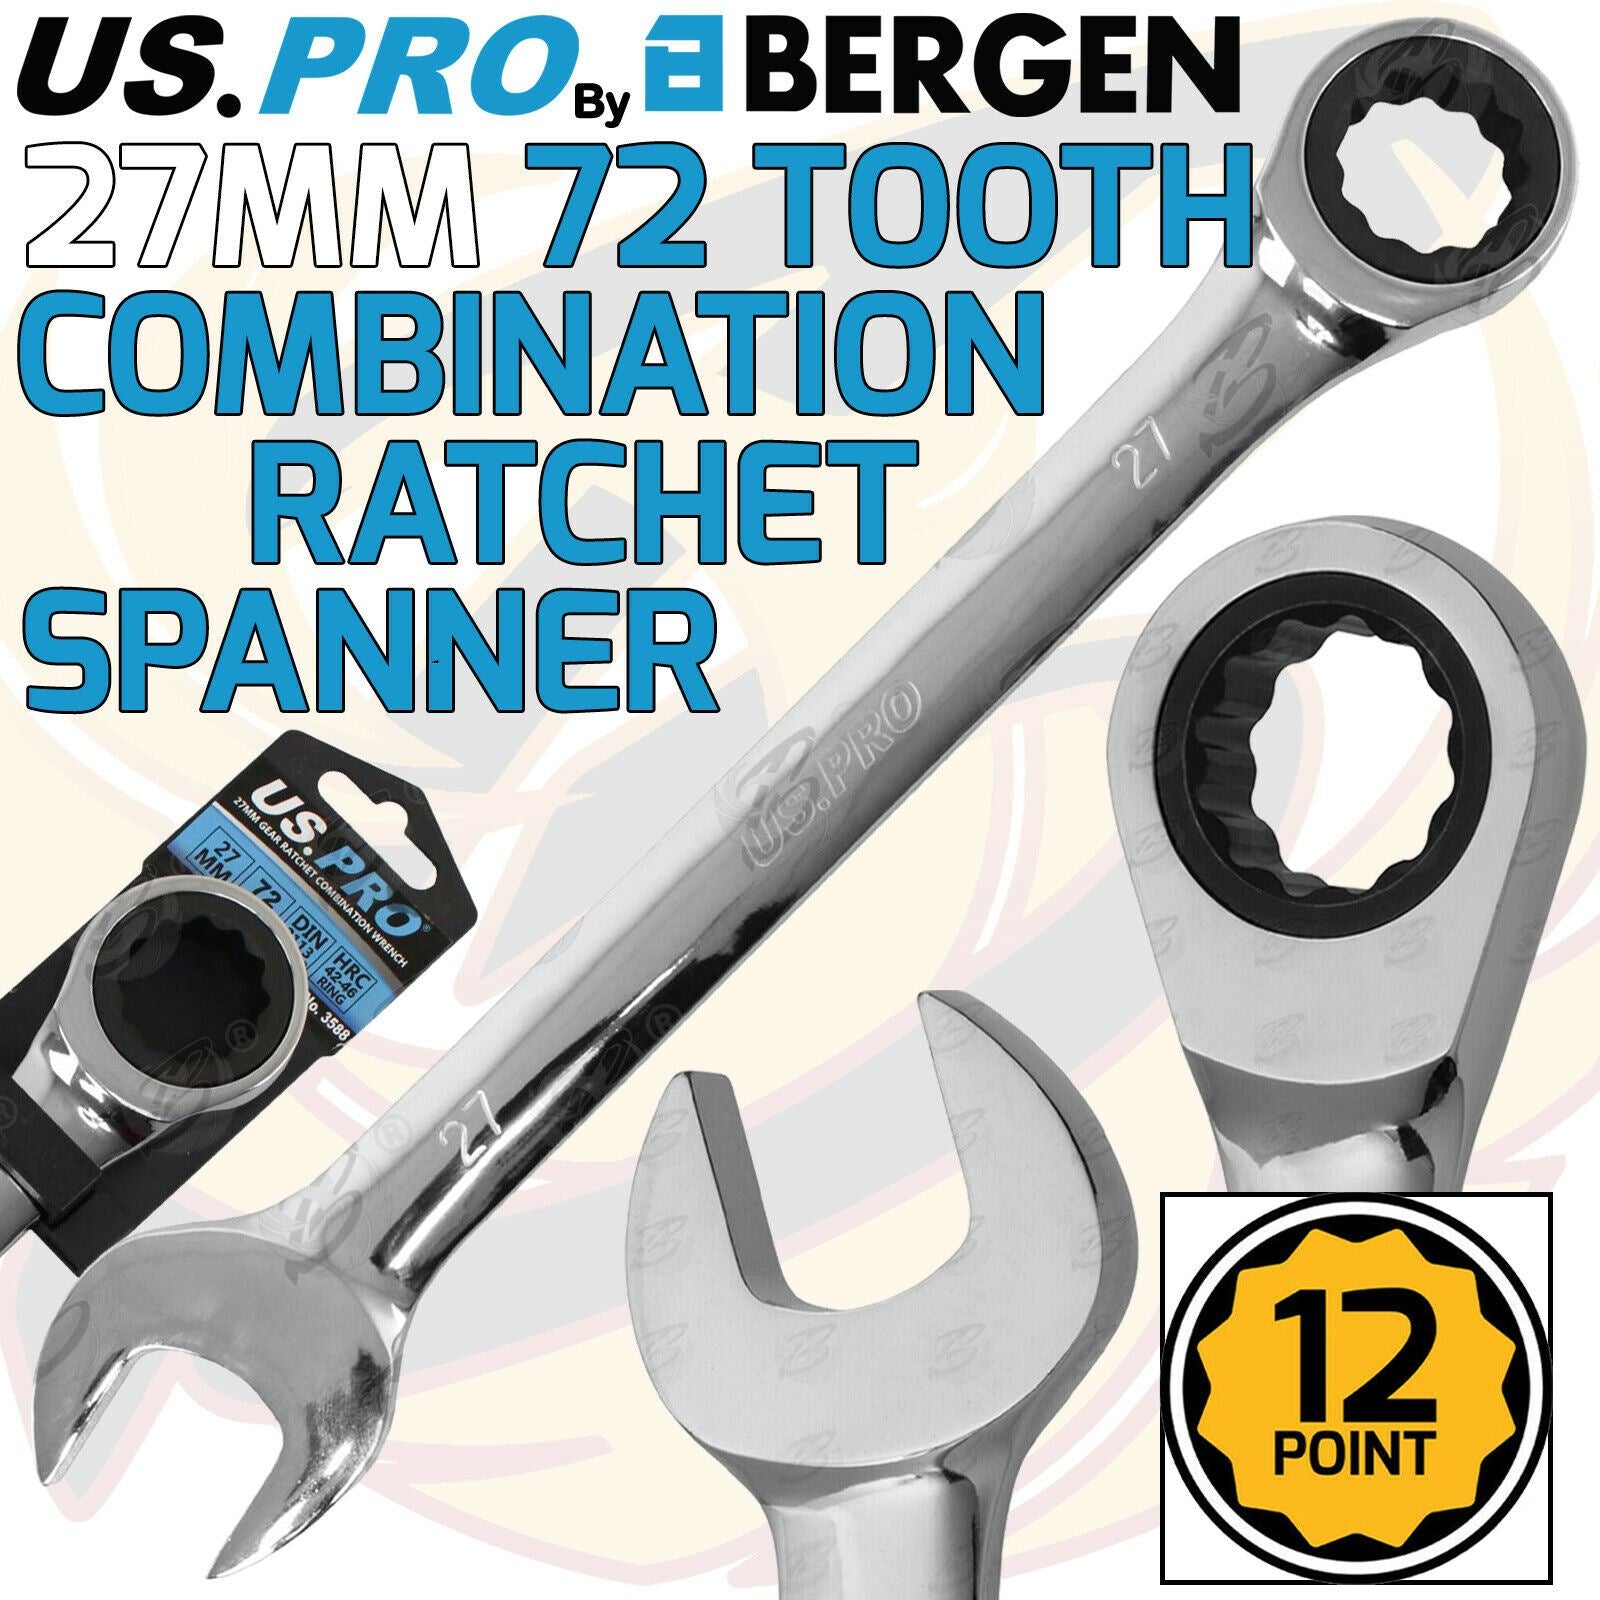 US PRO 27MM 72 TOOTH RATCHET SPANNER